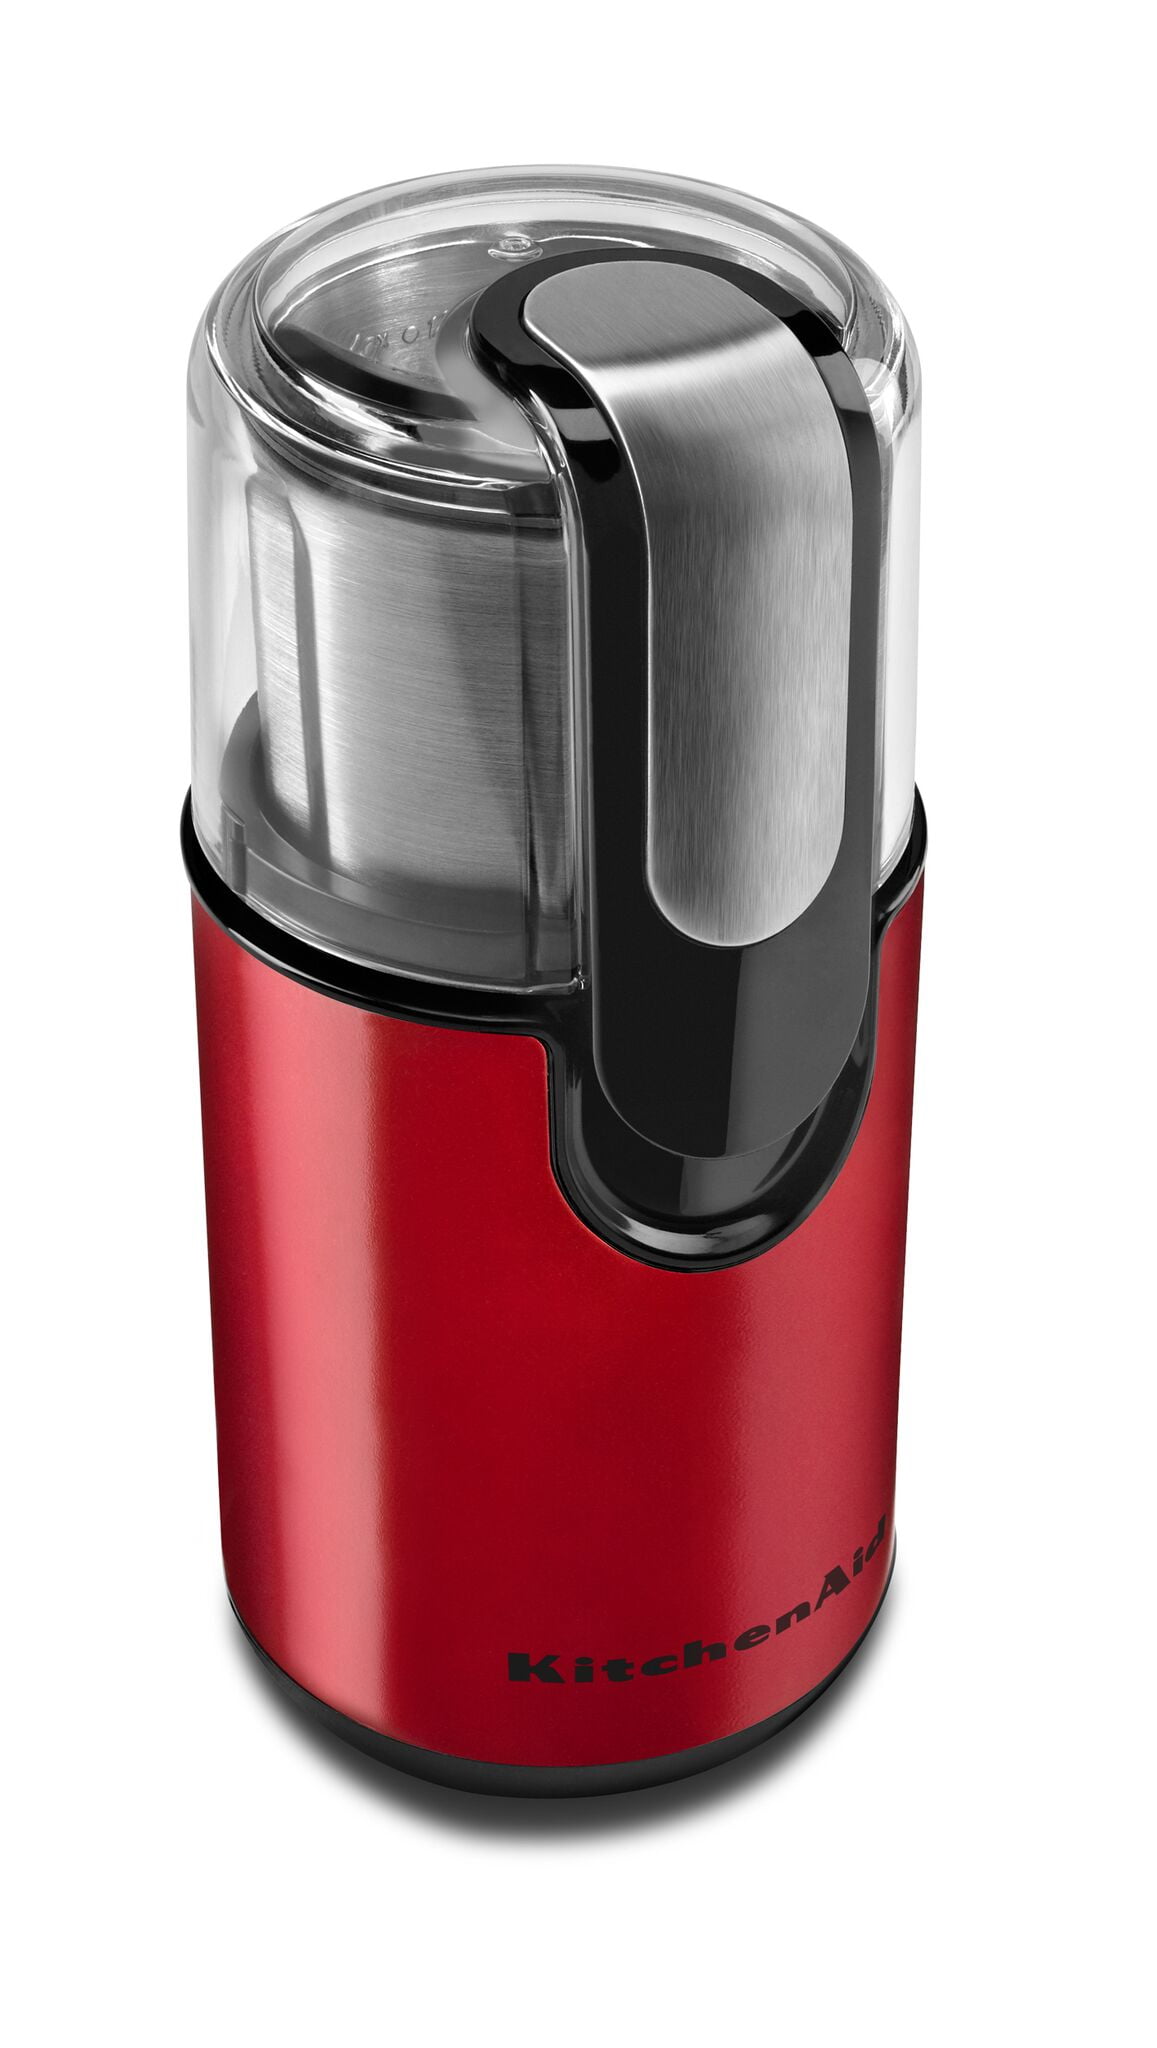 KitchenAid 7 oz. Onyx Black Coffee Grinder with Stainless Steel Blade  BCG111OB - The Home Depot